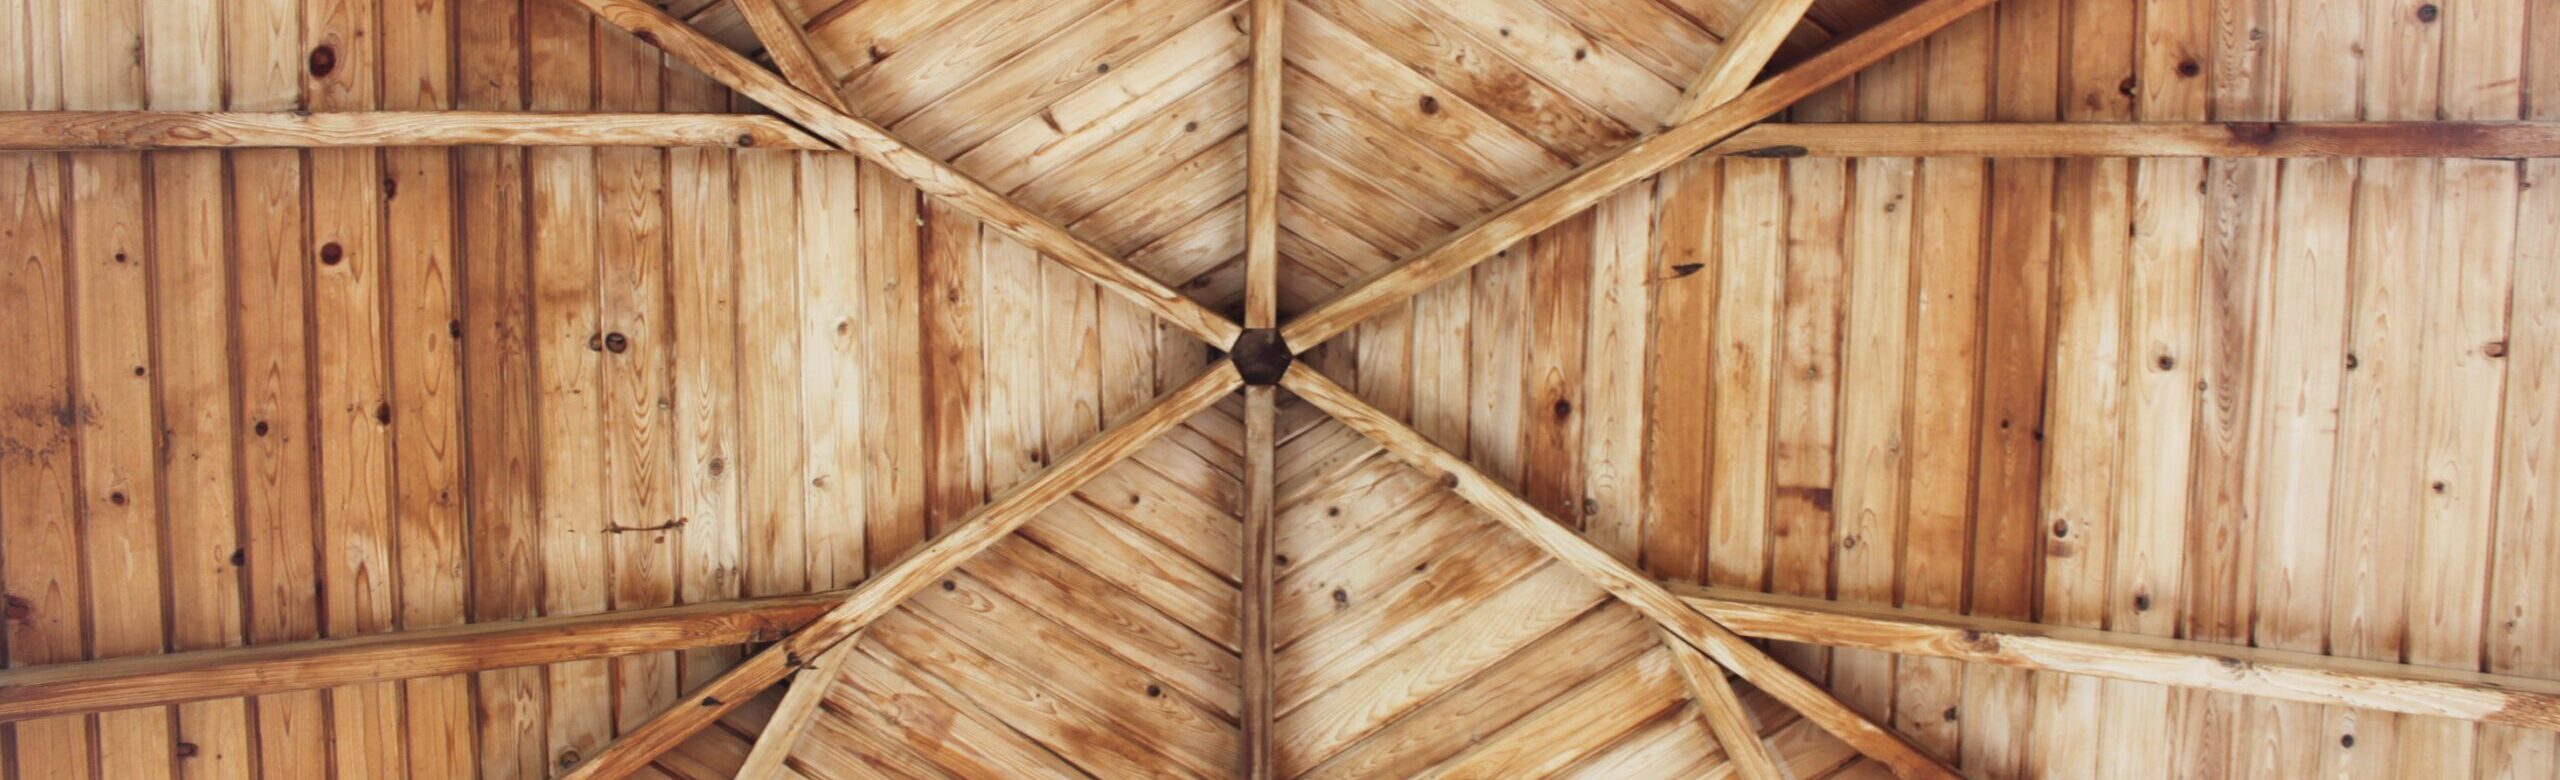 Building an intricate wooden ceiling takes planning and practice. What assignments led to this pattern's success?